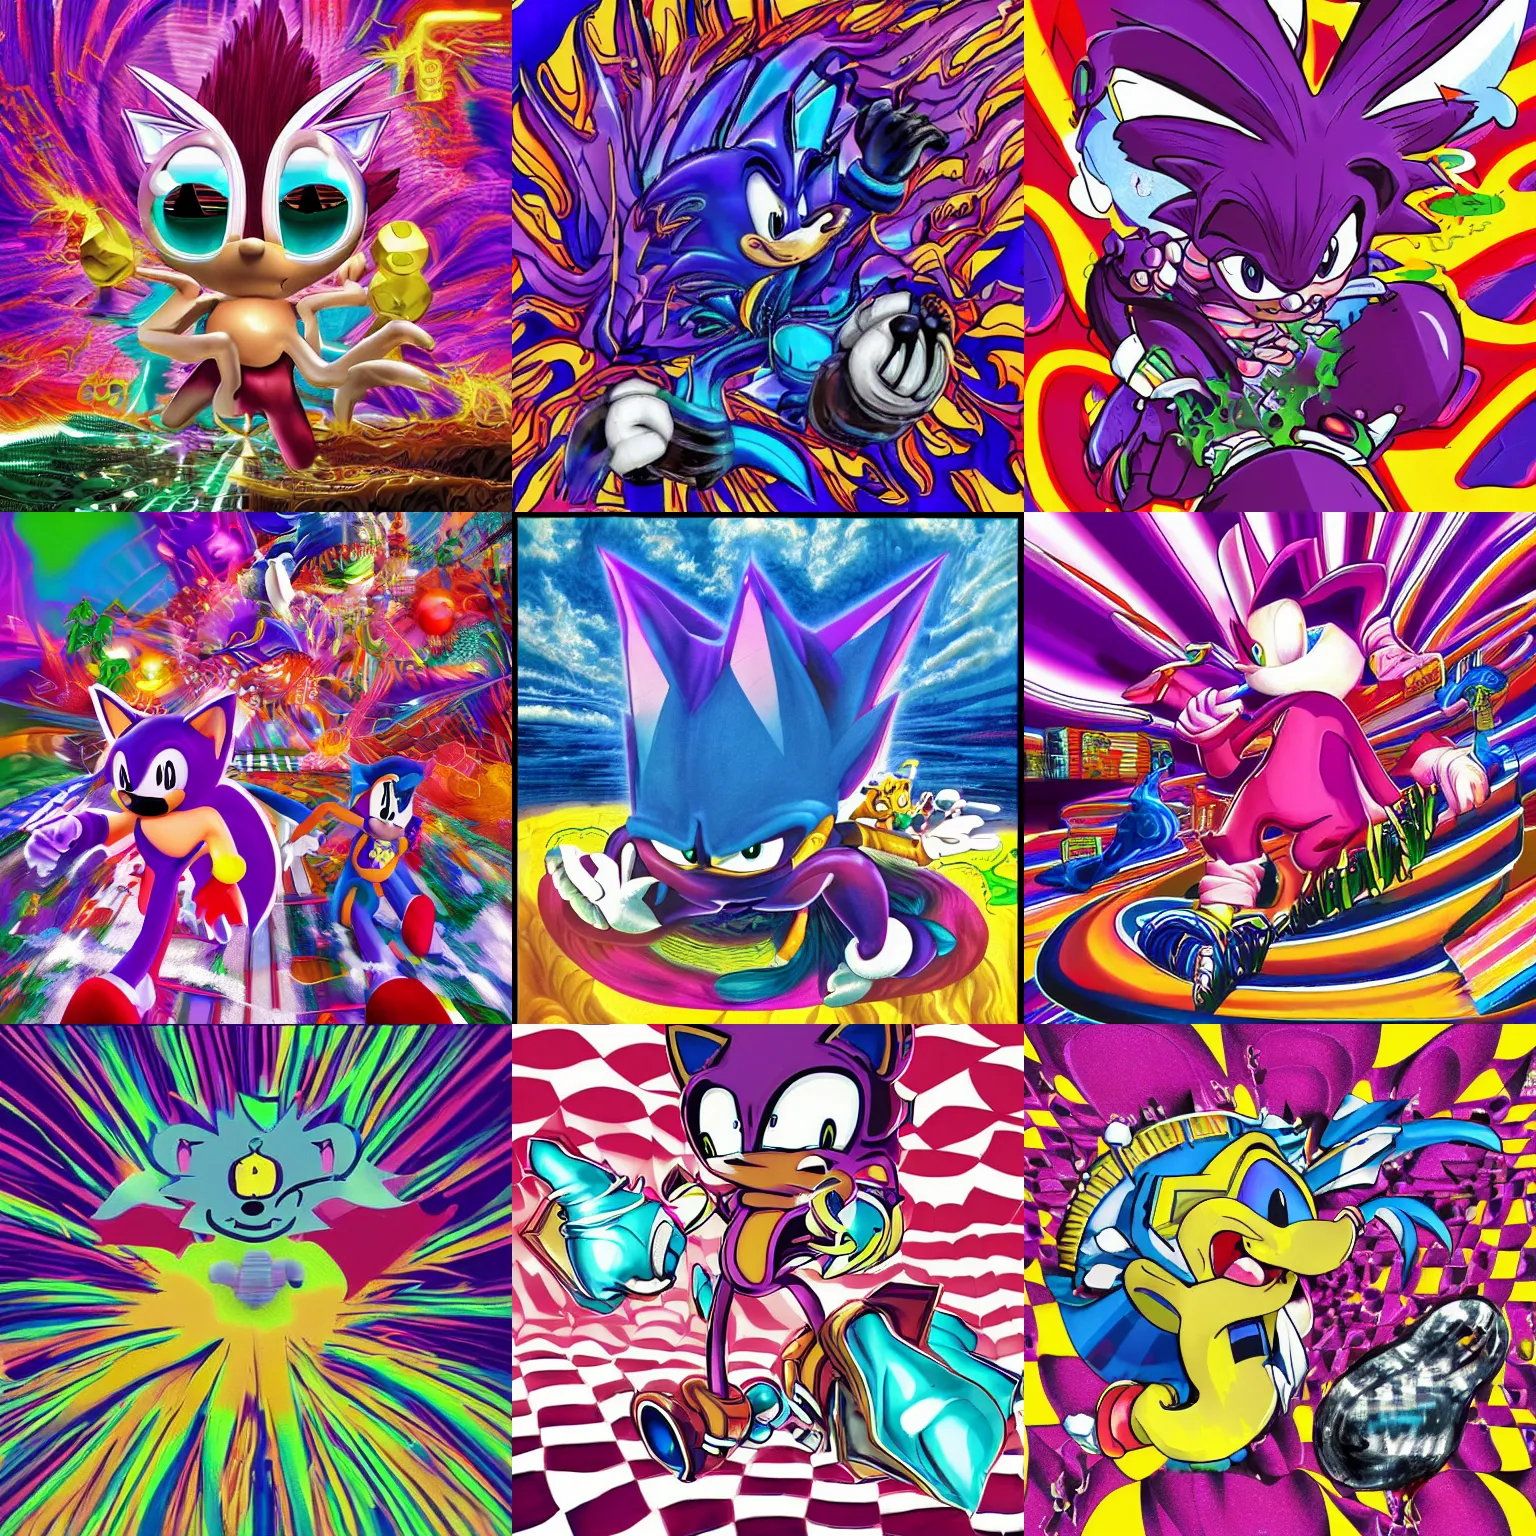 Prompt: surreal vaporwave, sonic hedgehog, sharp, detailed professional, high quality portrait sonic airbrush art MGMT album cover portrait of a liquid dissolving LSD DMT sonic the hedgehog surfing through cyberspace, purple checkerboard background, 1990s 1992 Sega Genesis video game album cover